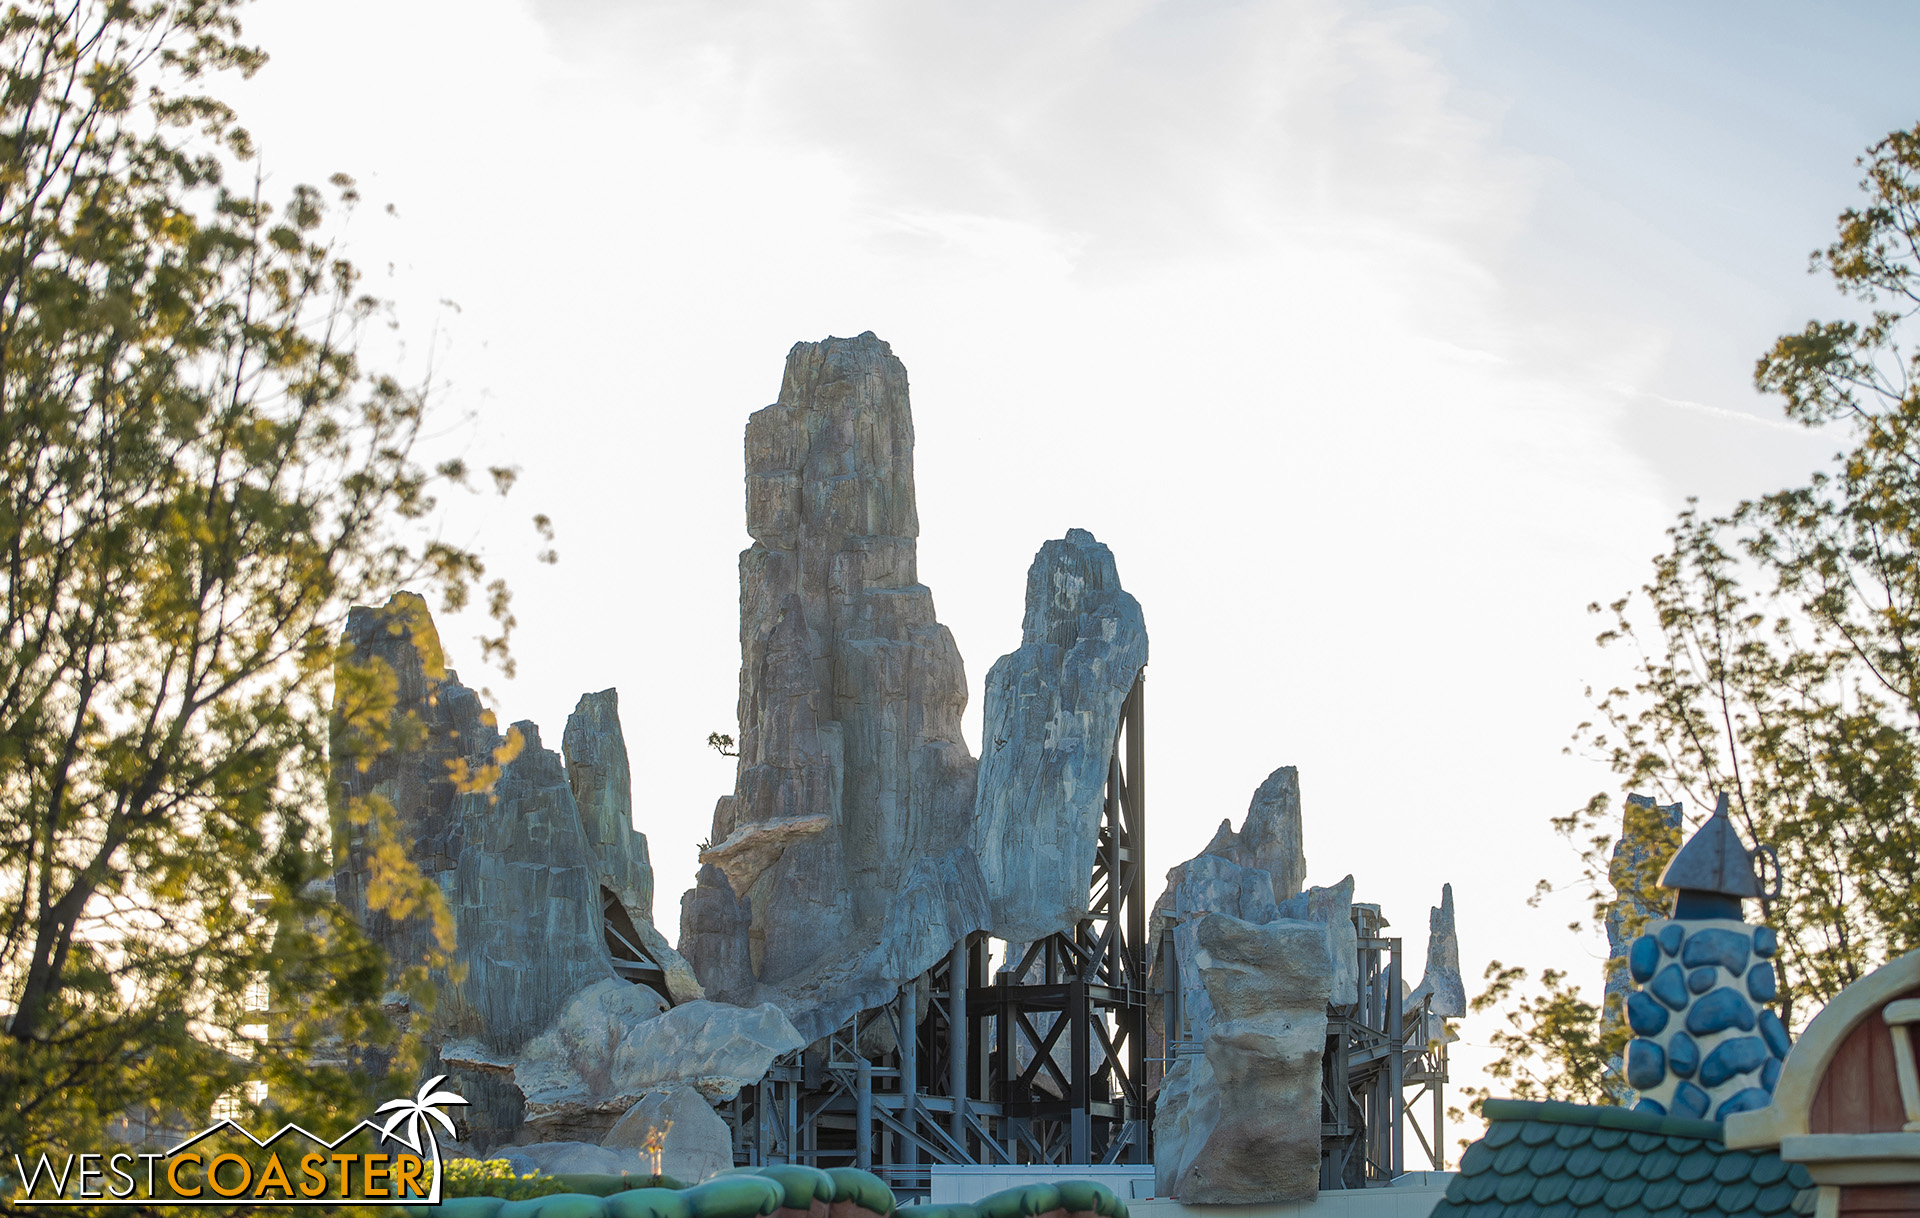  The ride vehicles for the main part of Rise of the Resistance will be trackless and radio-controlled, similar to Tokyo Disneyland’s Pooh’s Hunny Hunt or Walt Disney Studio’s Ratatouille ride. 